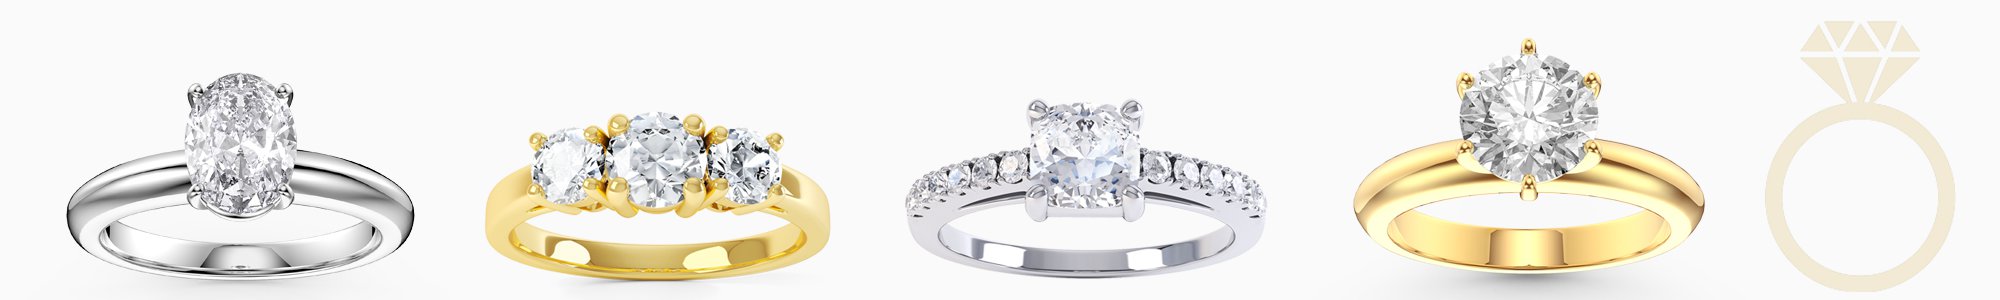 Shop Diamond Engagement Rings by Jian London. Buy direct and save from our wide selection of Rings at the Jian London jewellery Store. Free UK Delivery